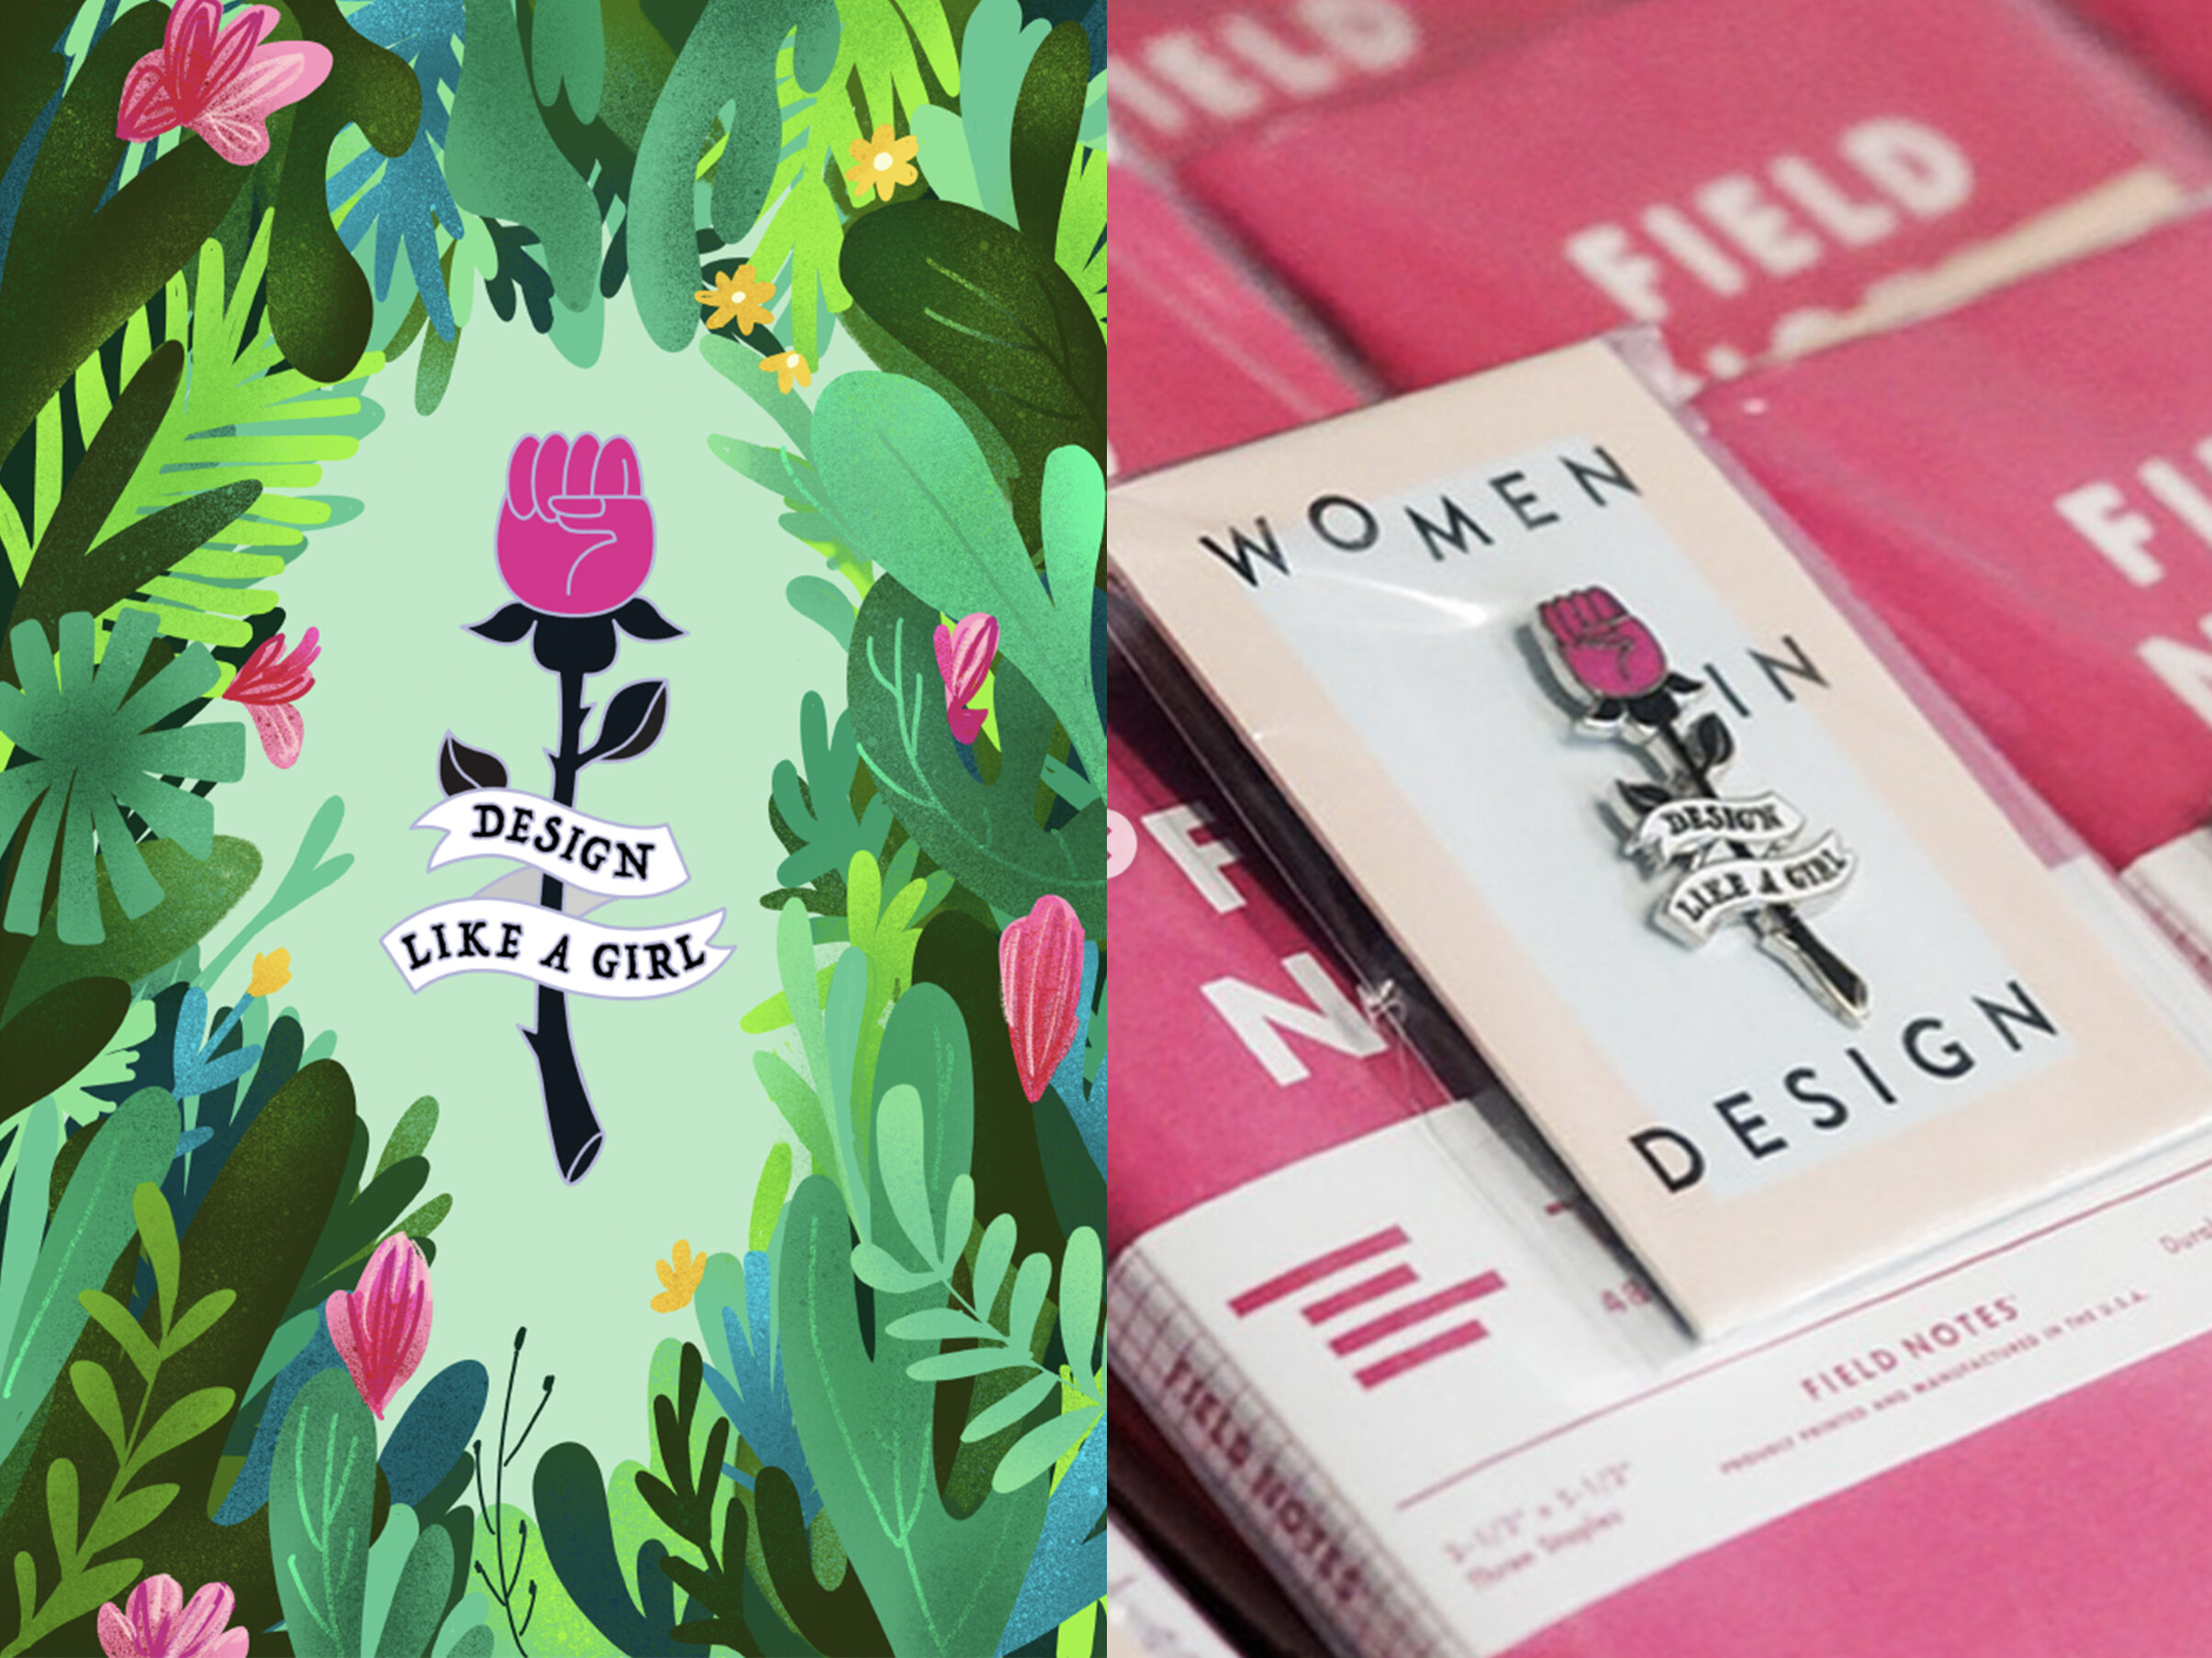 Pin Design For Women in Design Conference